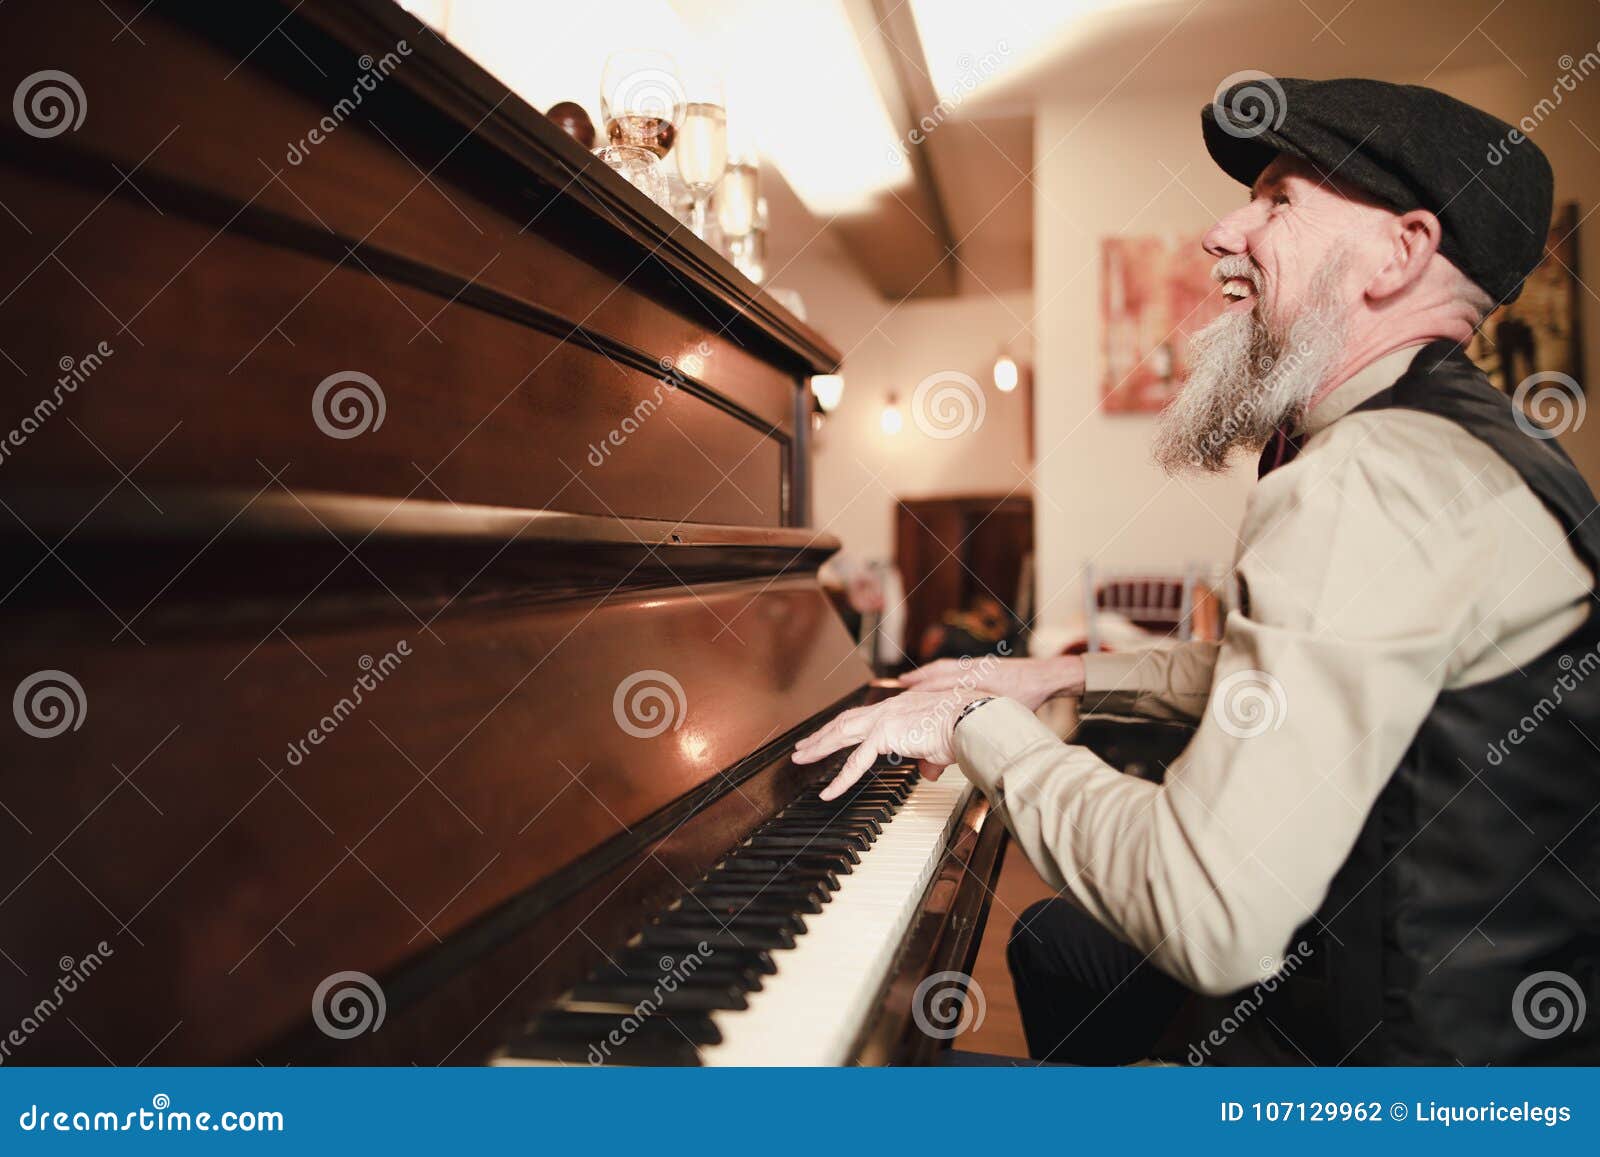 playing a piano for the guests